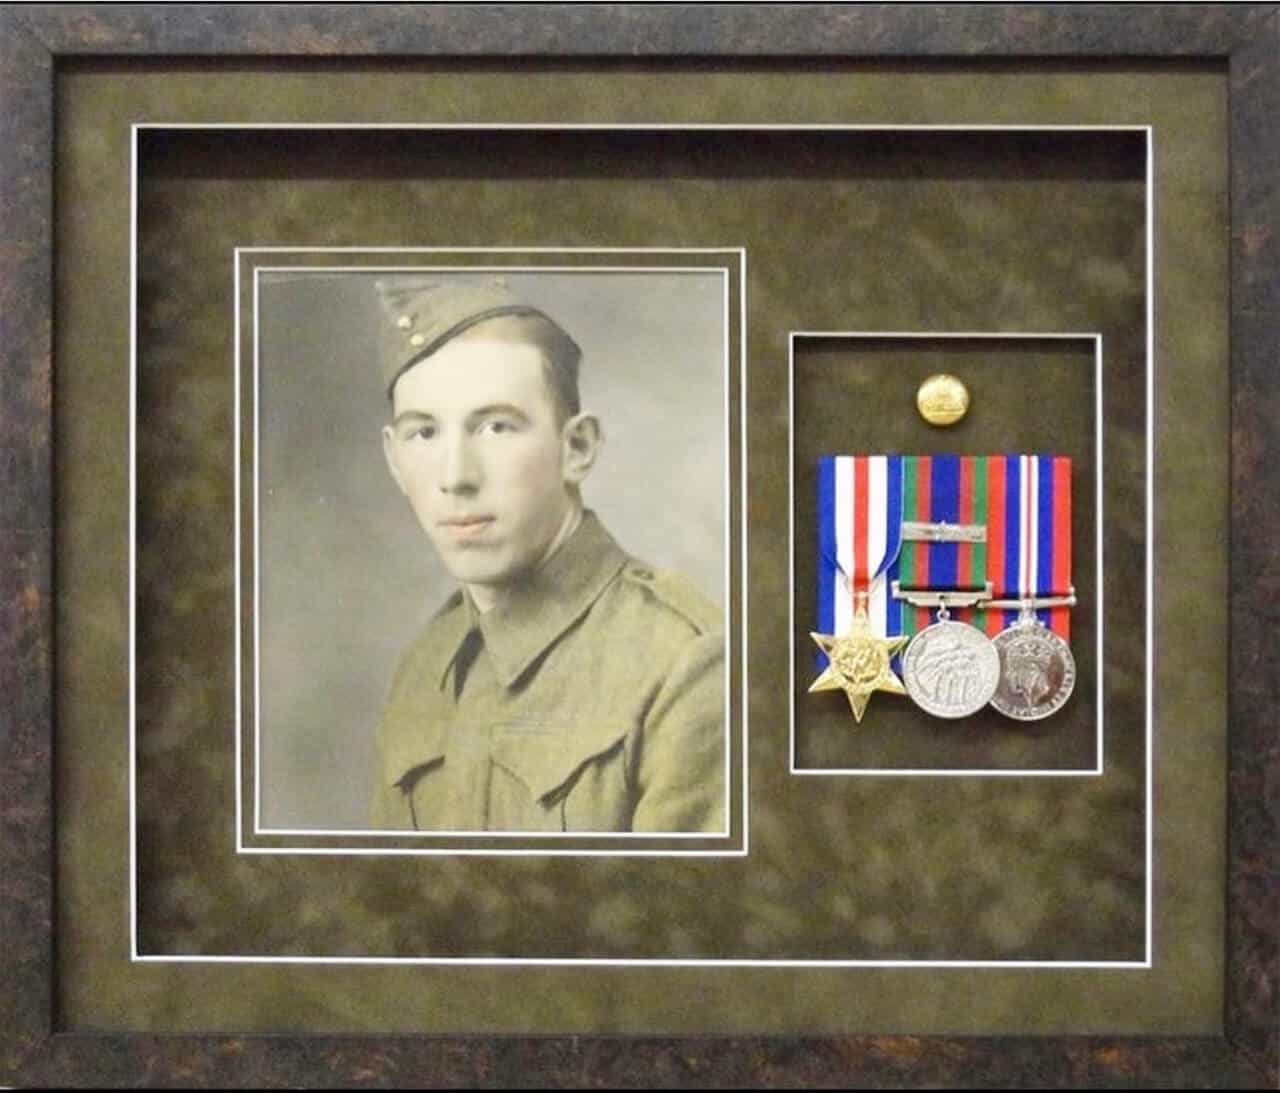 A frame with medals and a photo of a soldier.